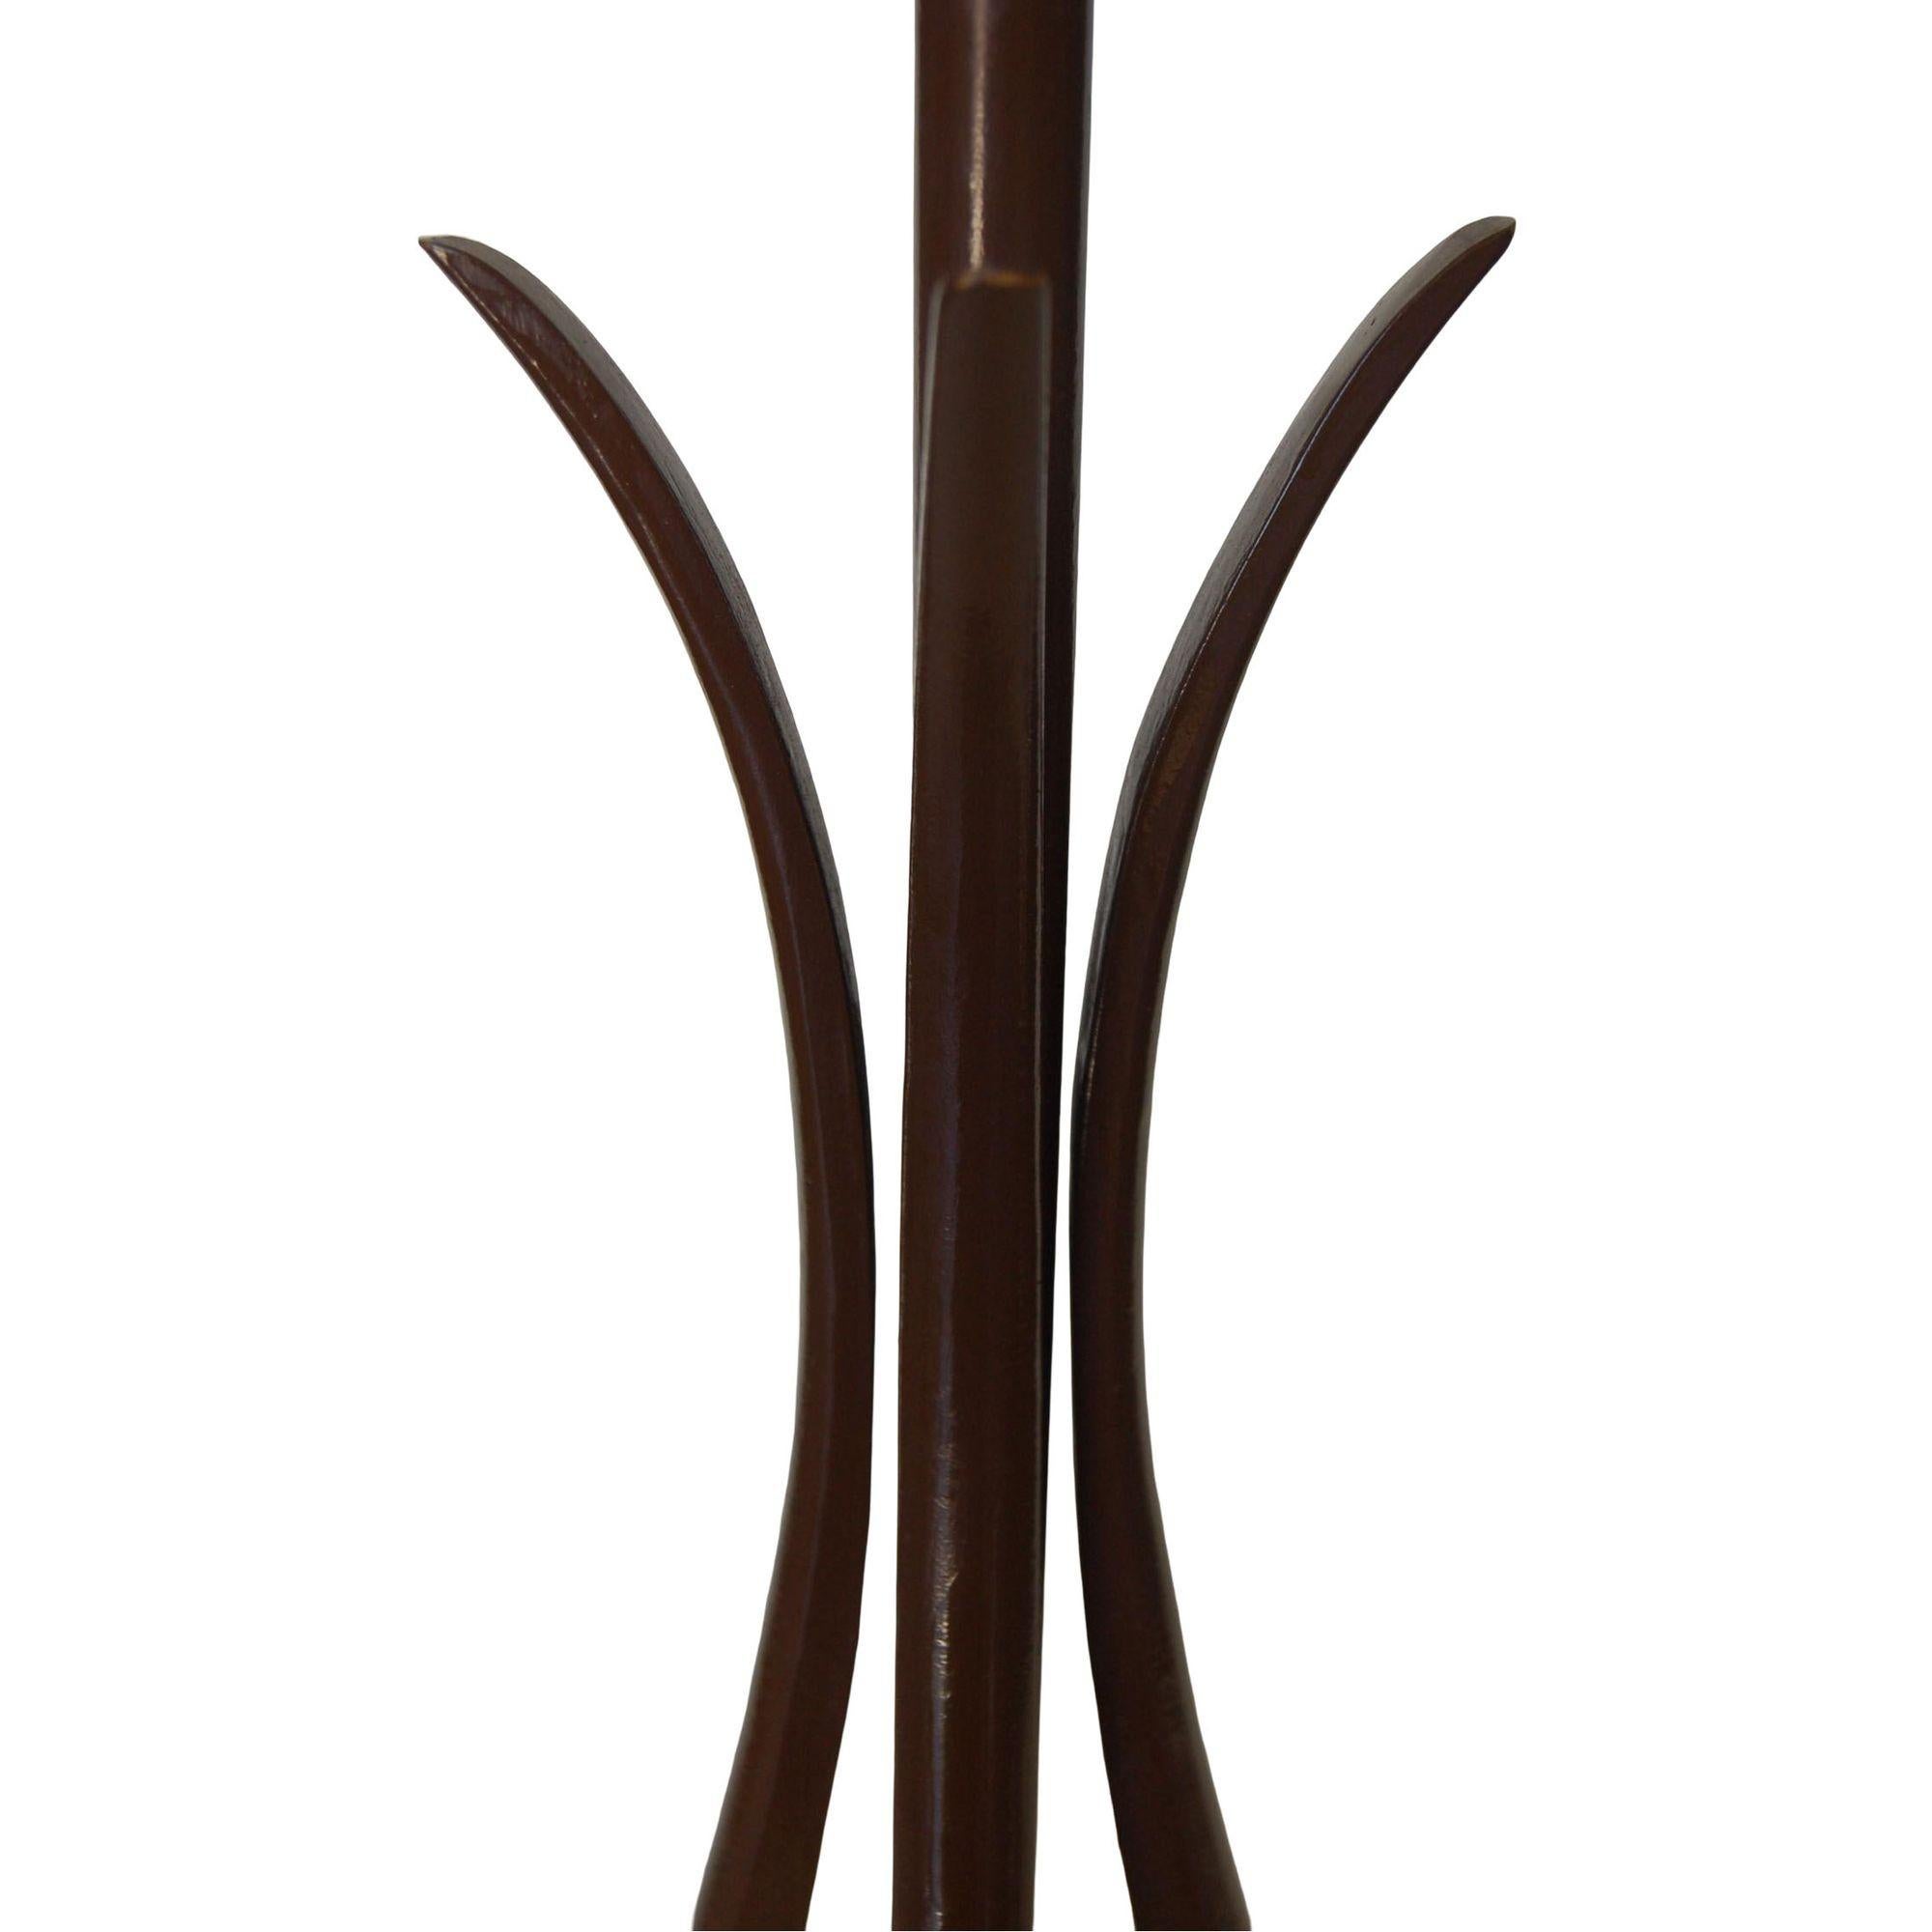 American Modernist Harp Shaped Sculptural Walnut and Brass Tone Table Lamp, Pair For Sale